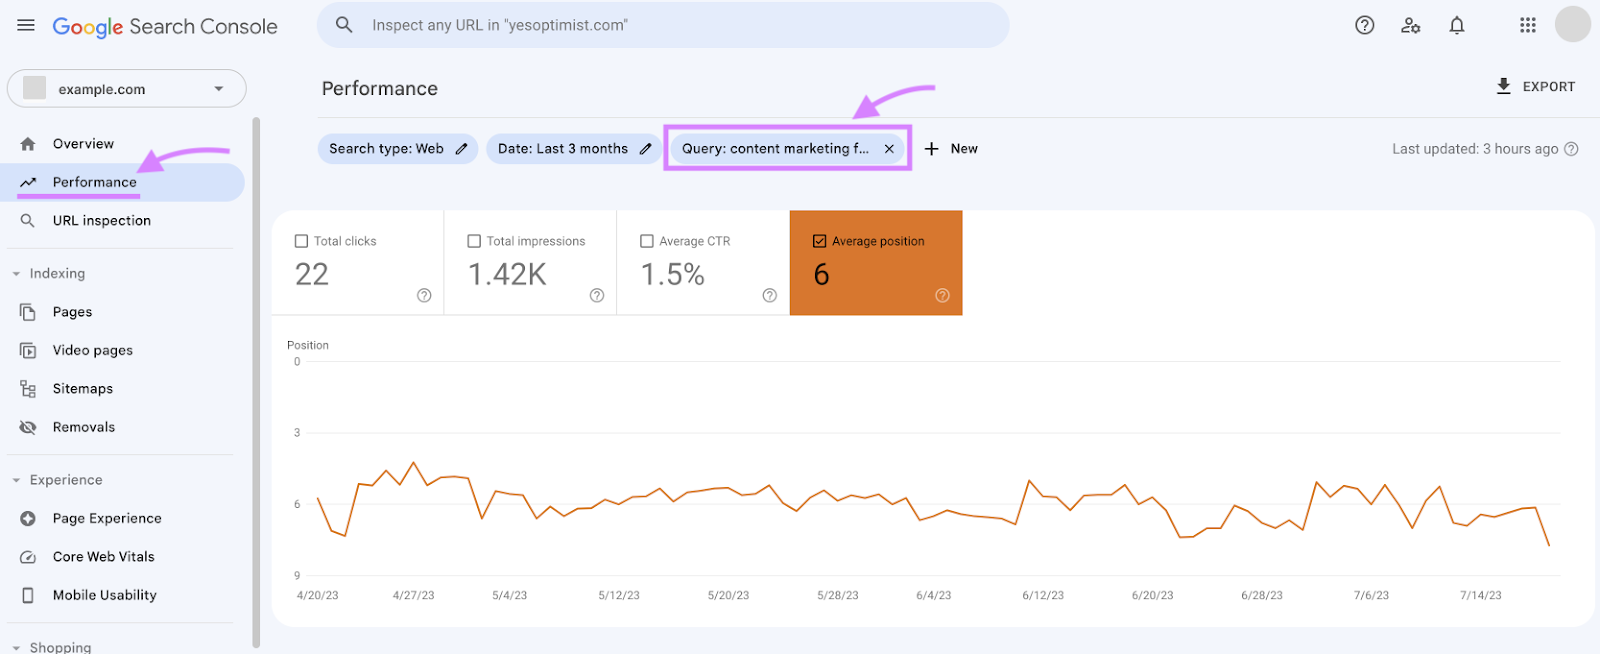 "Performance" tab in Google Search Console